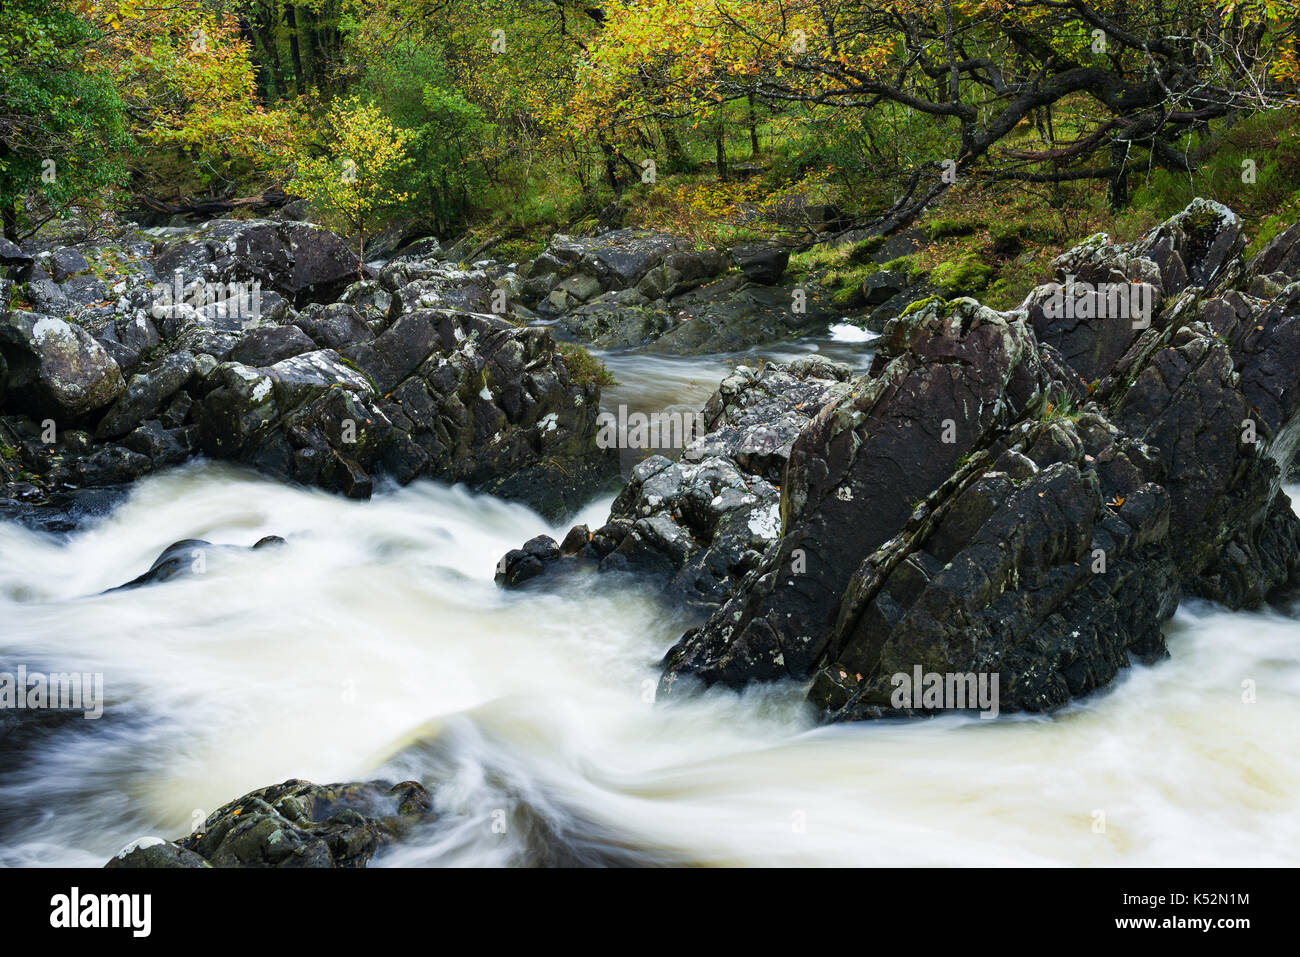 River running through rocks and Autumn coloured trees, Wales, United Kingdom Stock Photo